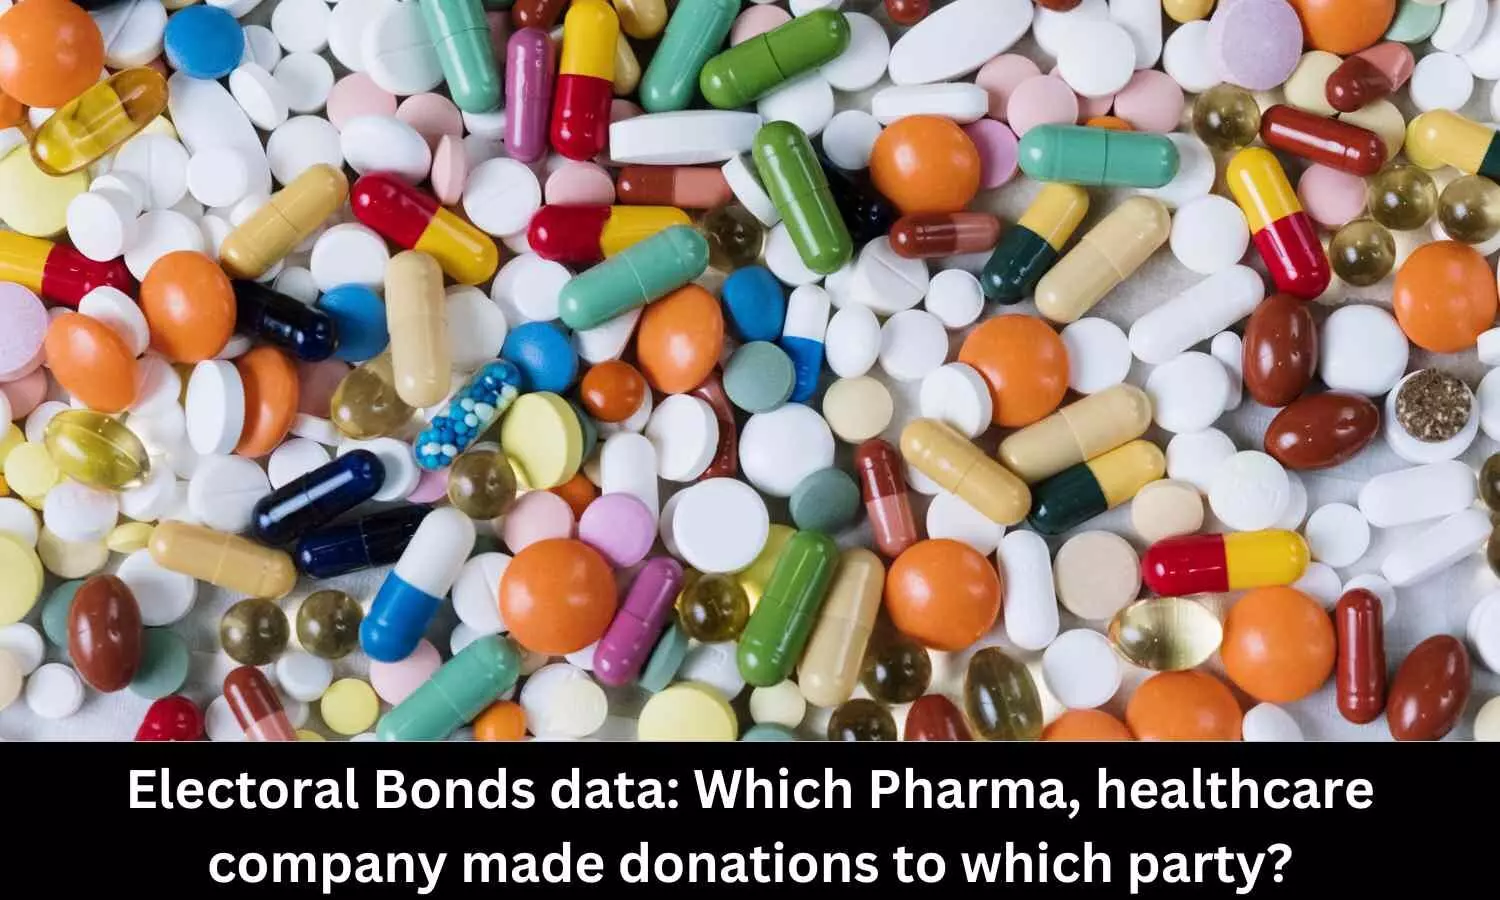 Data on Electoral Bonds: Which healthcare, pharma co made donations to which party?